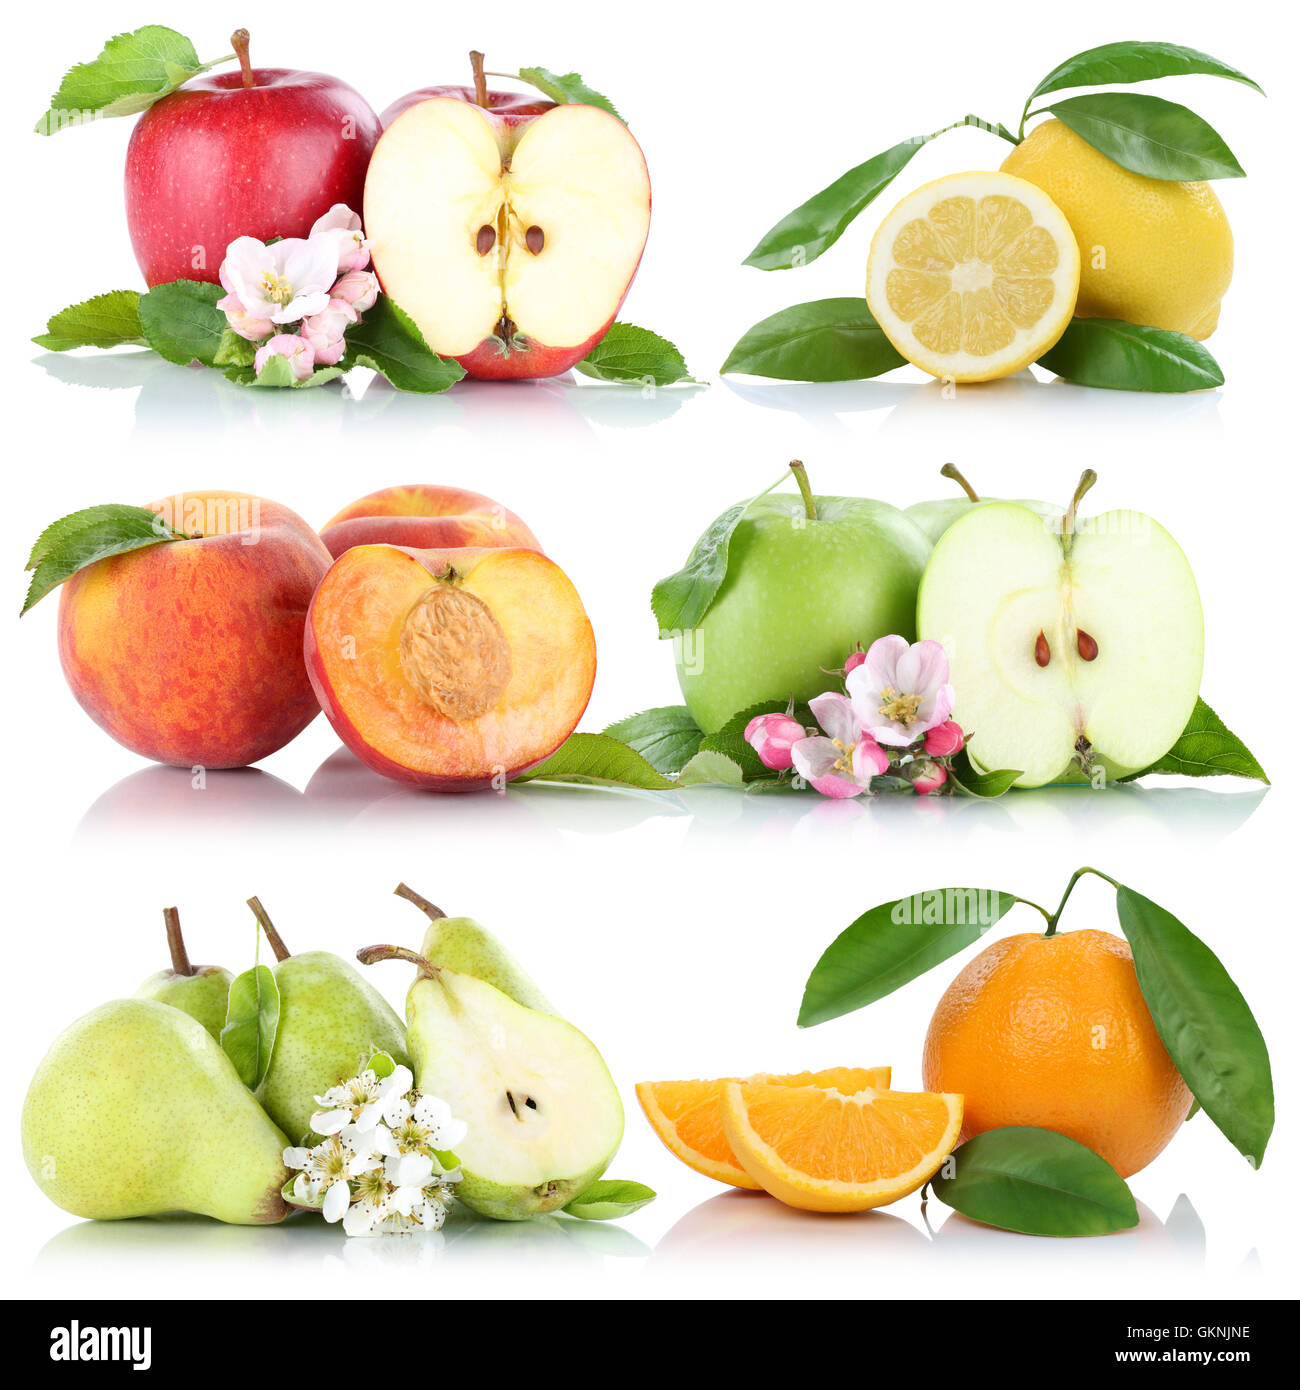 Fruits apple orange peach apples oranges collection isolated on a white background Stock Photo